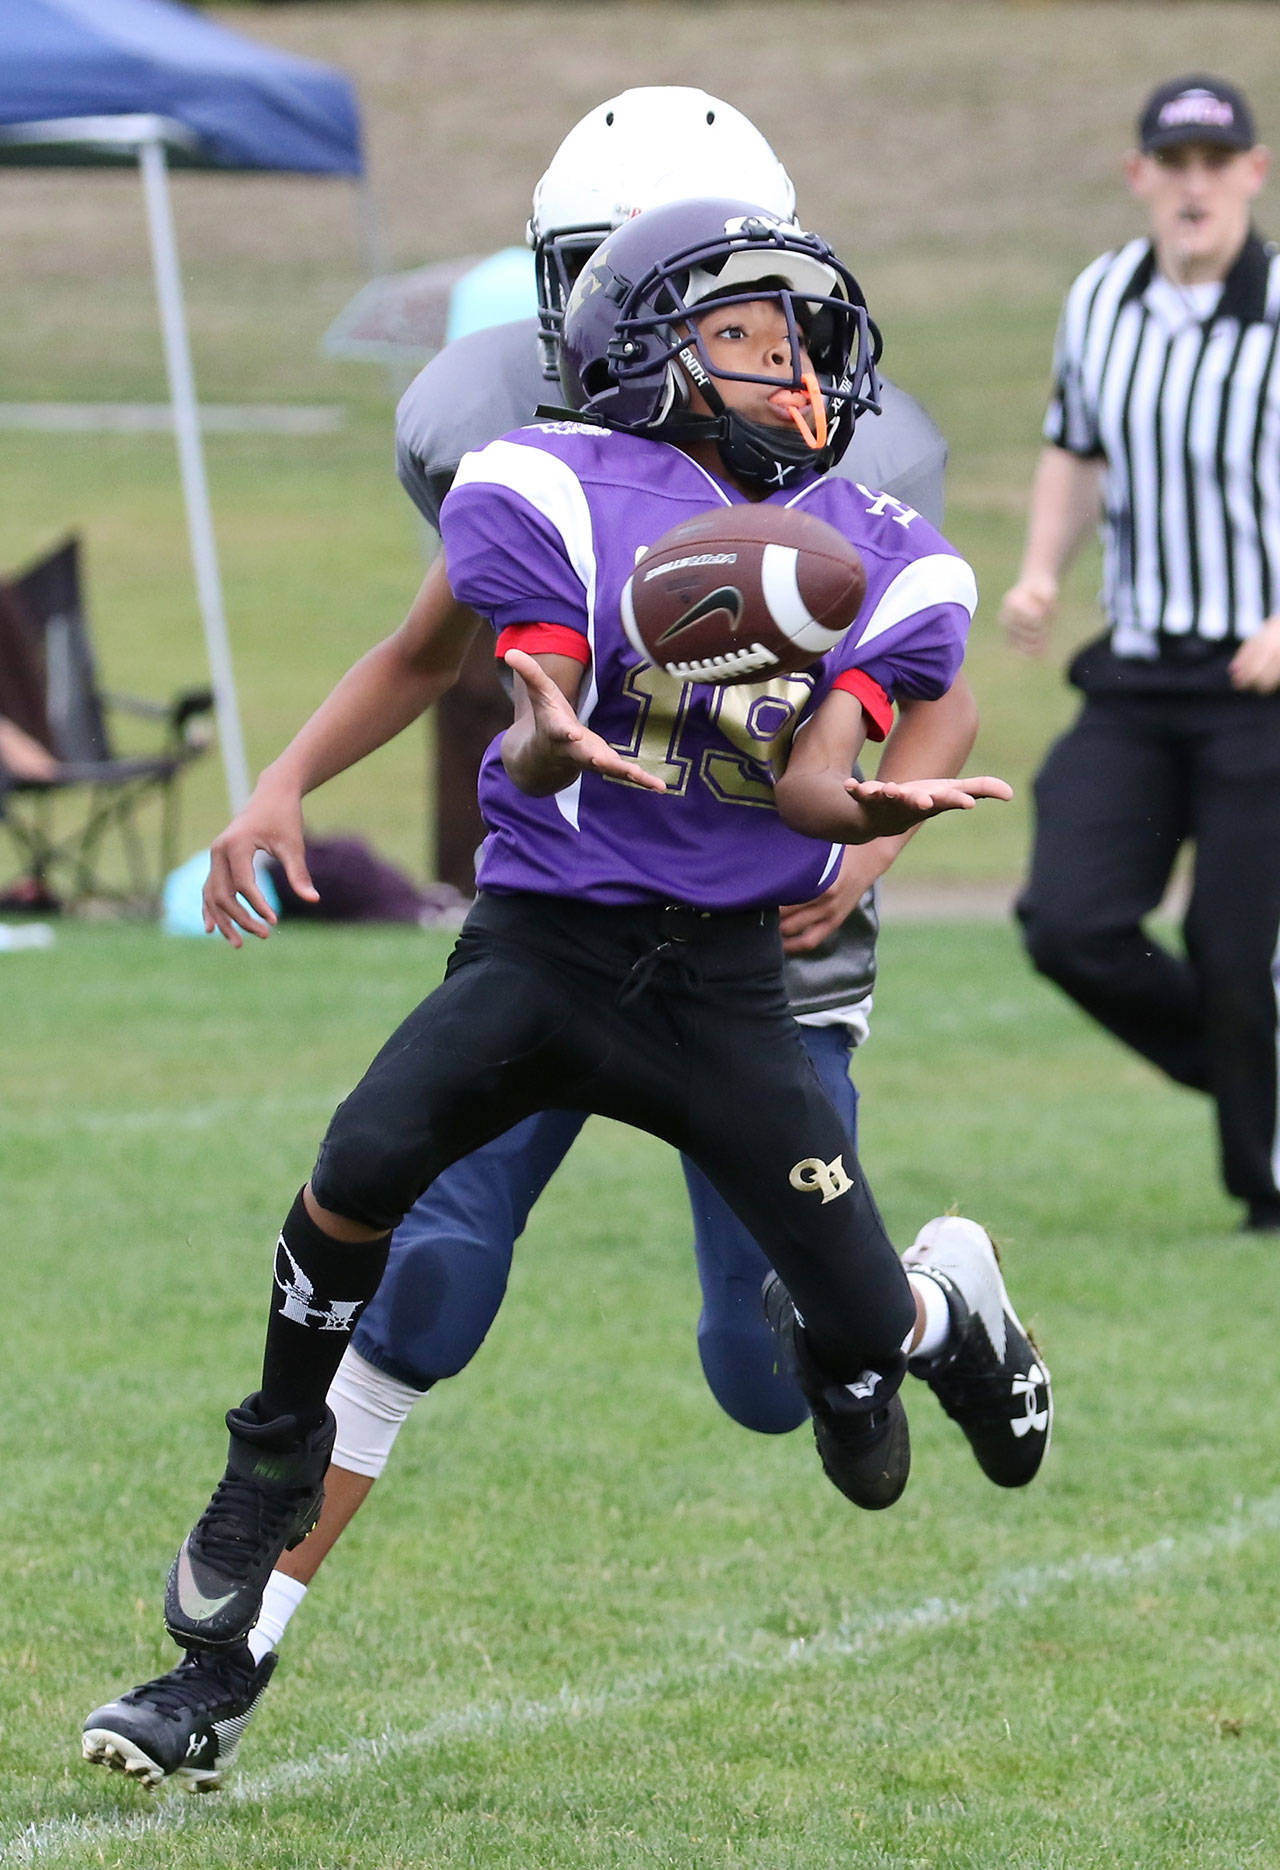 Photos: Oak Harbor teams compete at Fort Nugent / Youth football